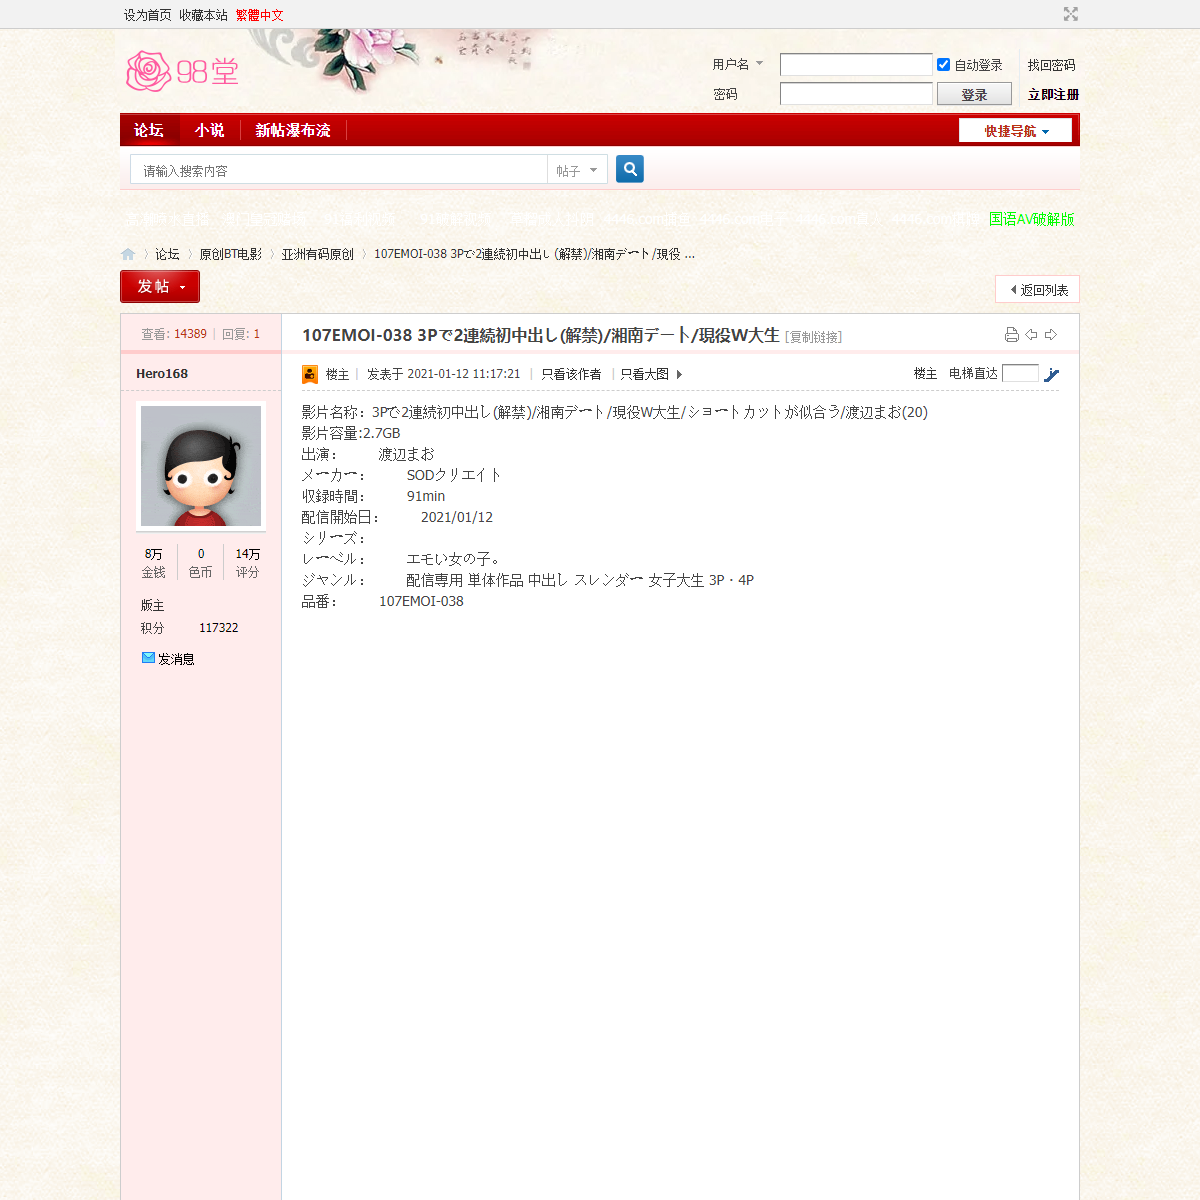 A complete backup of https://www.sehuatang.net/thread-441784-1-1.html